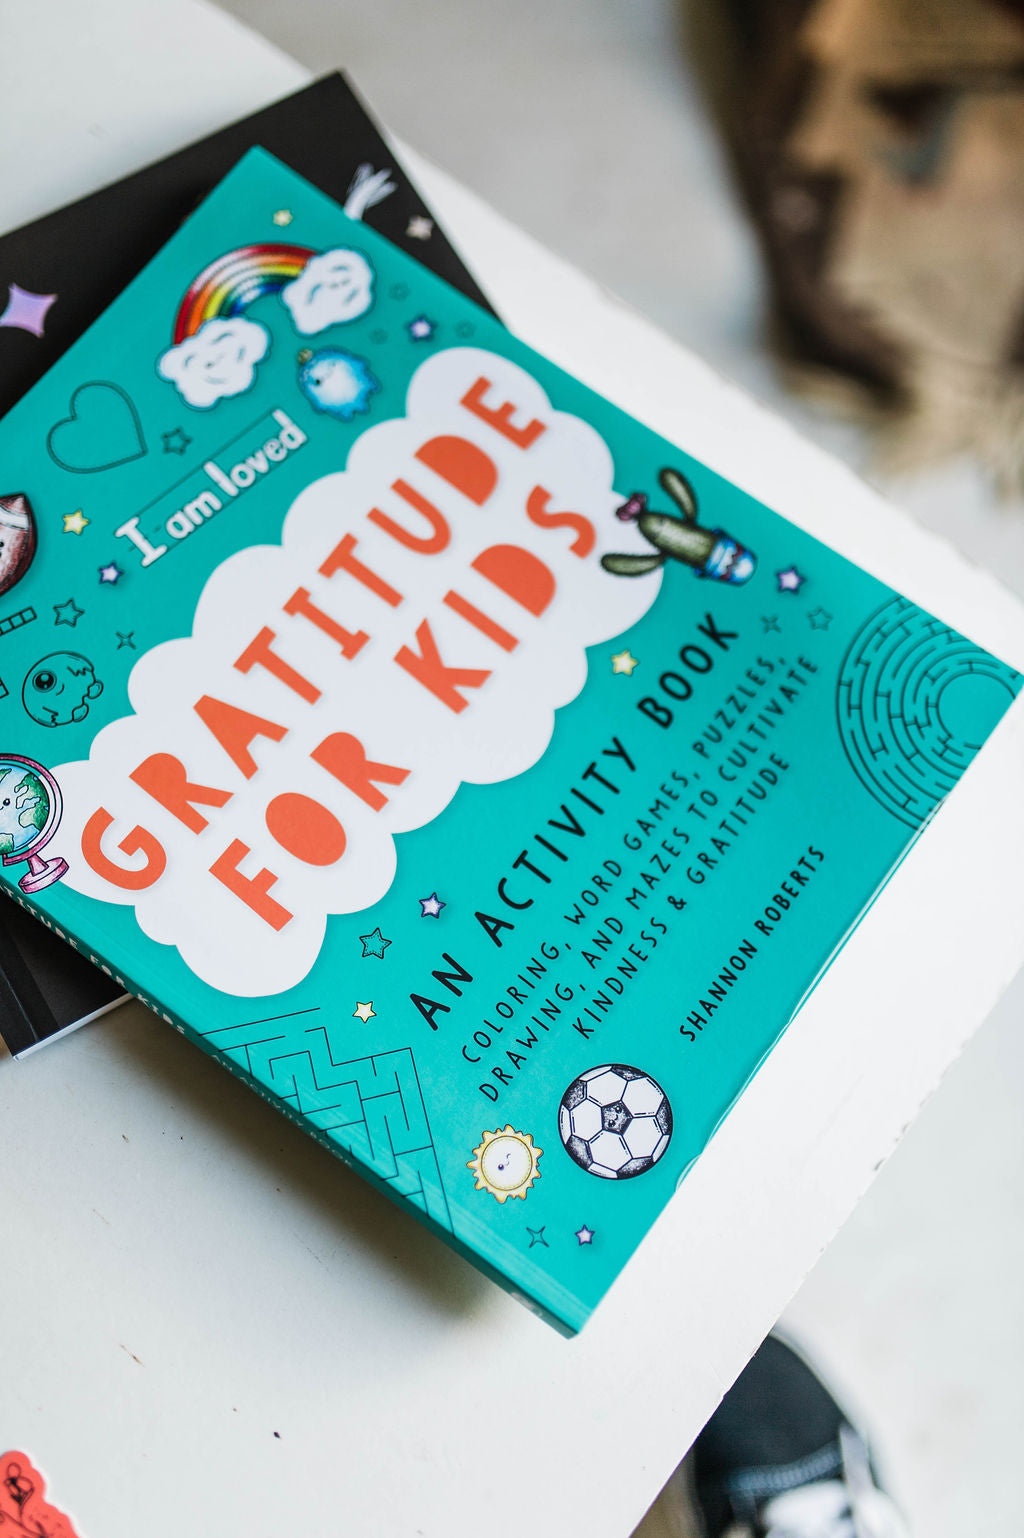 gratitude for kids by shannon roberts | activity book